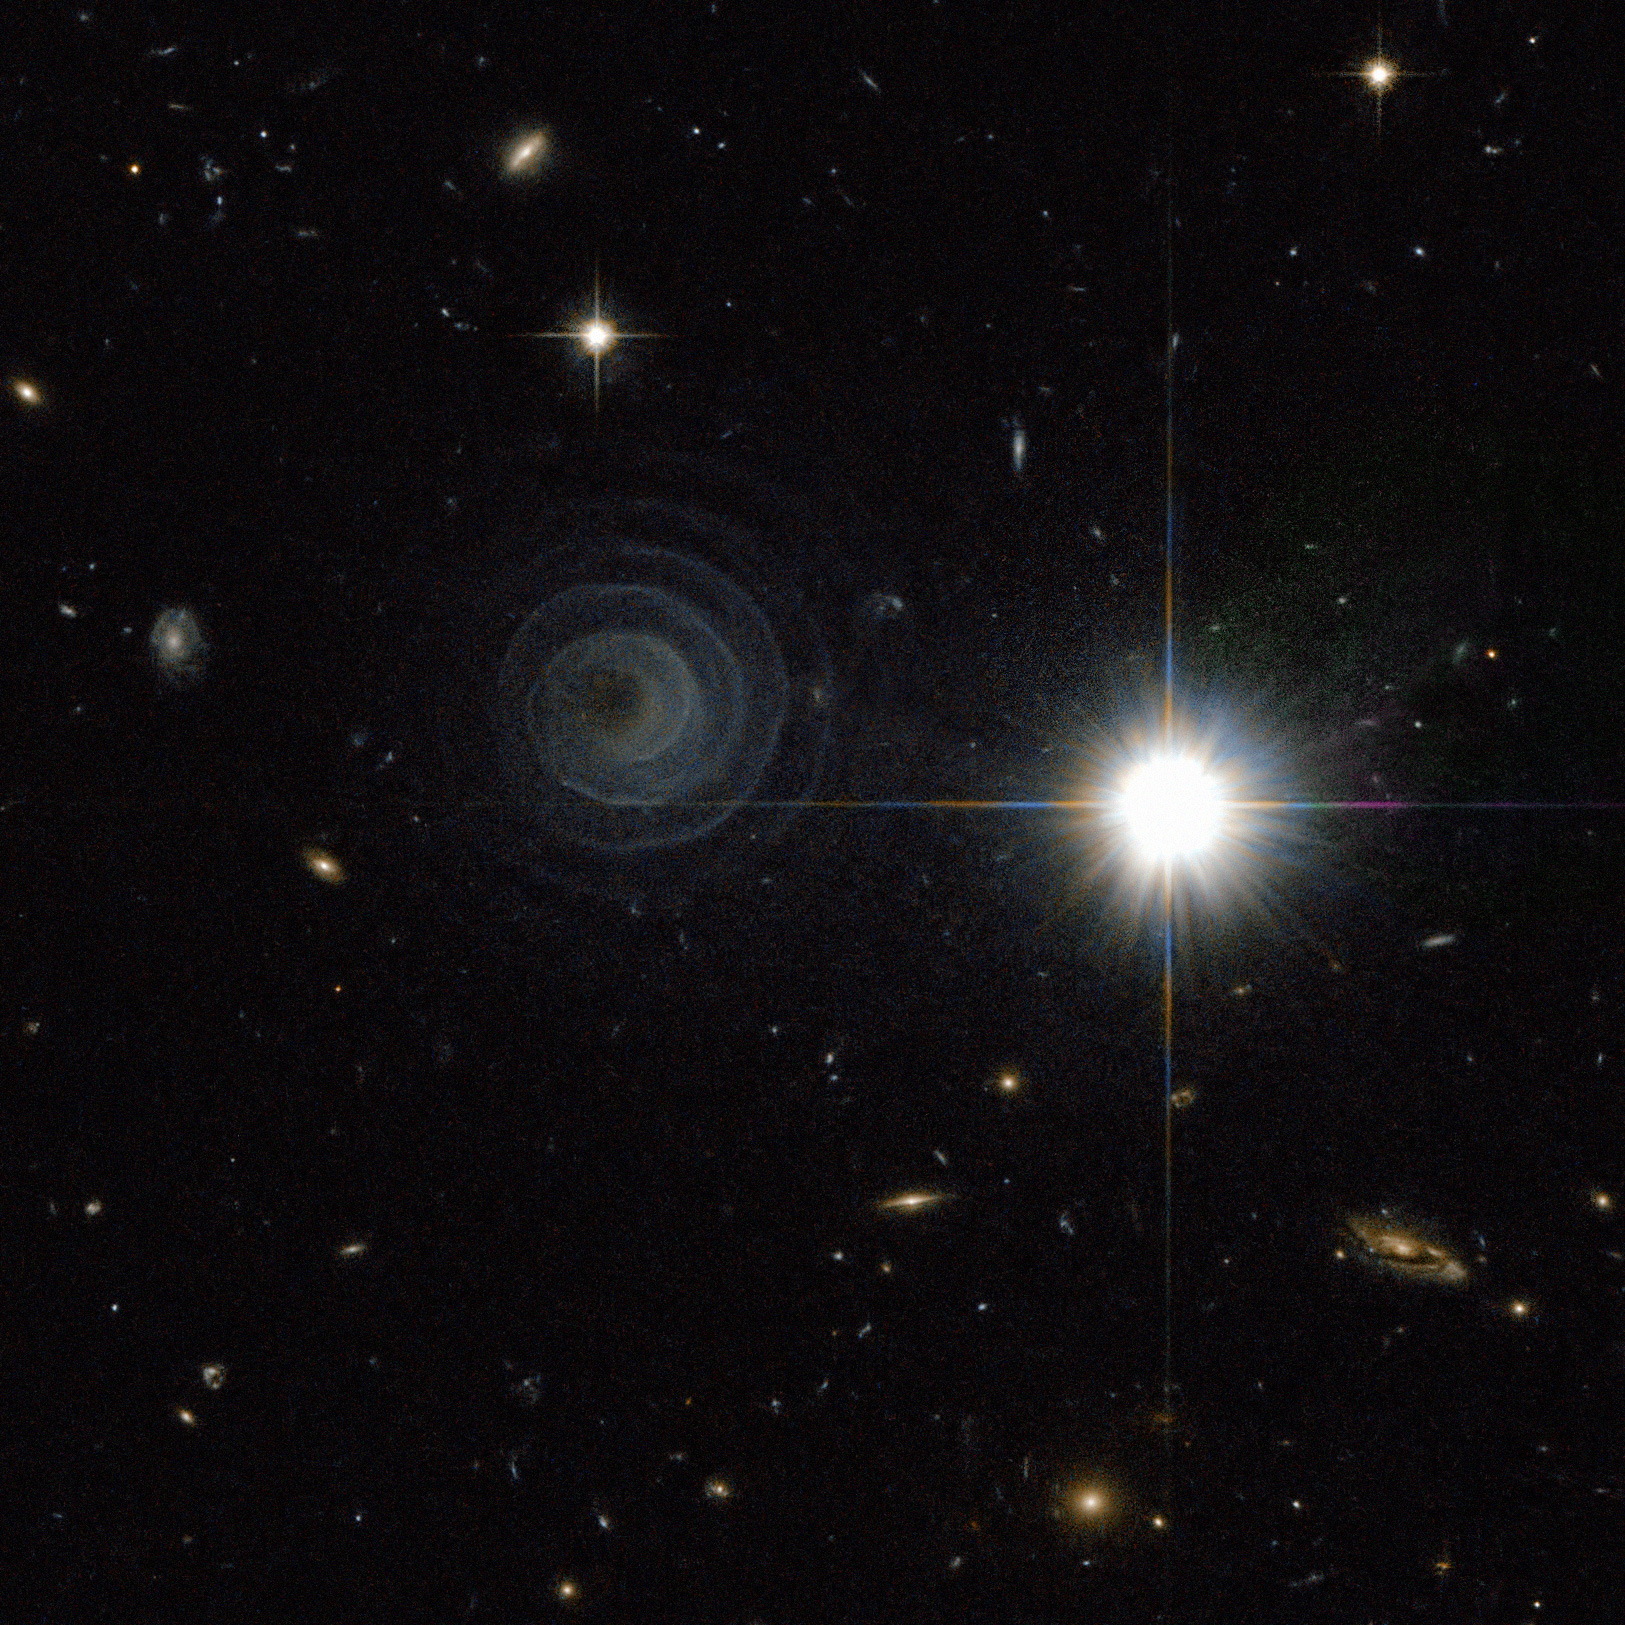 A black background is punctuated with distant stars and galaxies. One bright foreground star sits just to the right of image center. Slightly above and to the left of image center is a faint, bluish-green spiral.